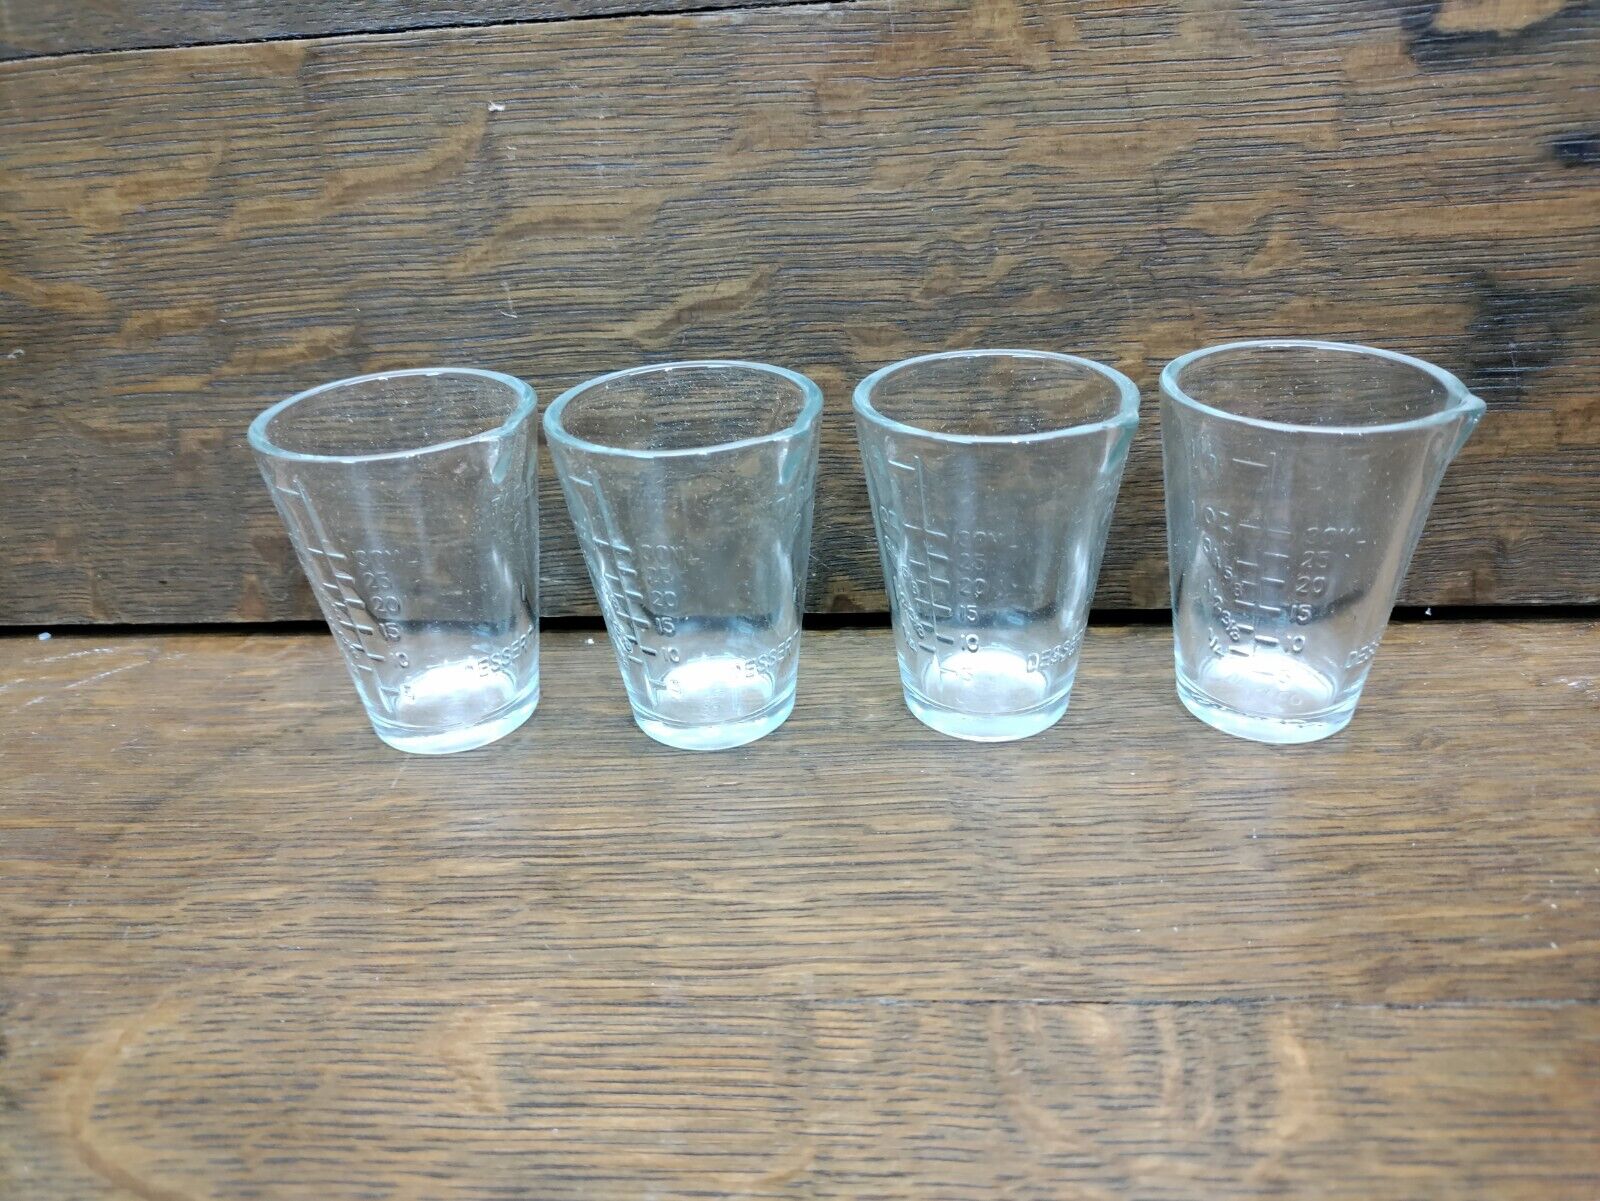 4 Vintage NOS 50ml Dose Glass W/ Spout. SCIENCE SHOT GLASSES Pharmacy Apothecary